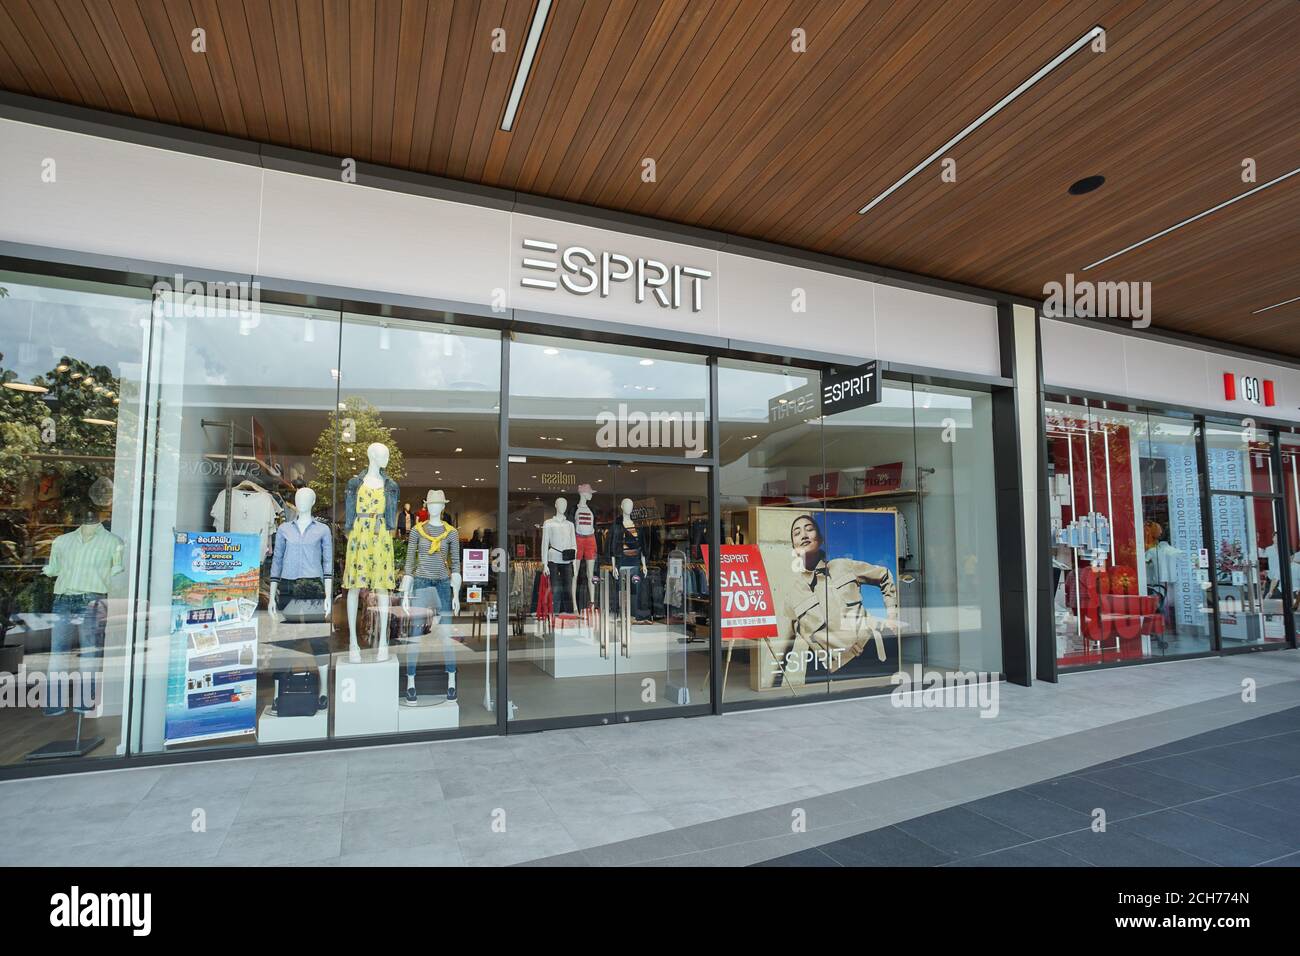 Samut Prakan, Thailand - July 28, 2020: Esprit shop in Siam Premium Outlets Bangkok. Esprit is a fashion brand was founded in California by couple Sus Stock Photo